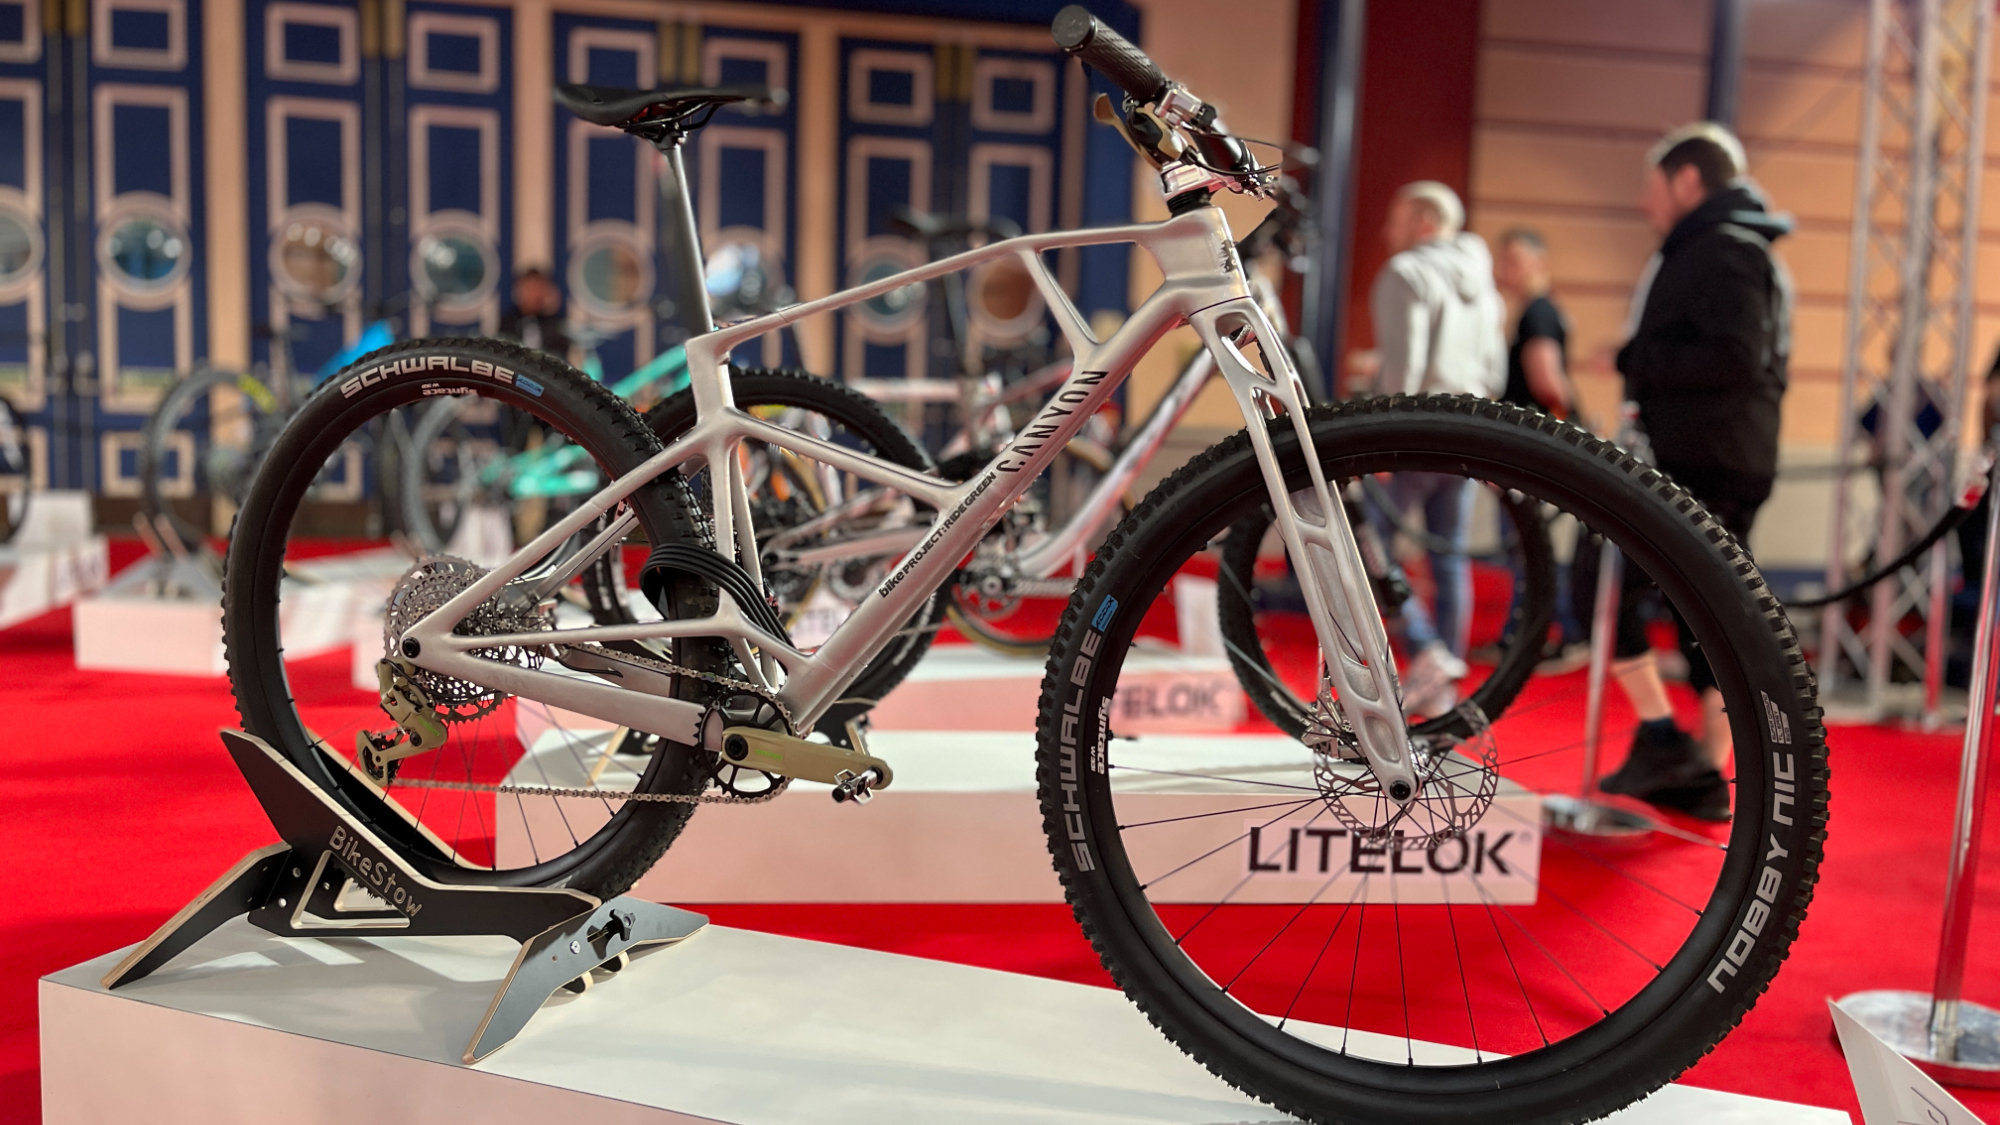 annoncere hamburger Høne Canyon shows off its 3D-printed alloy MTB concept at the London Cycle show  | BikePerfect